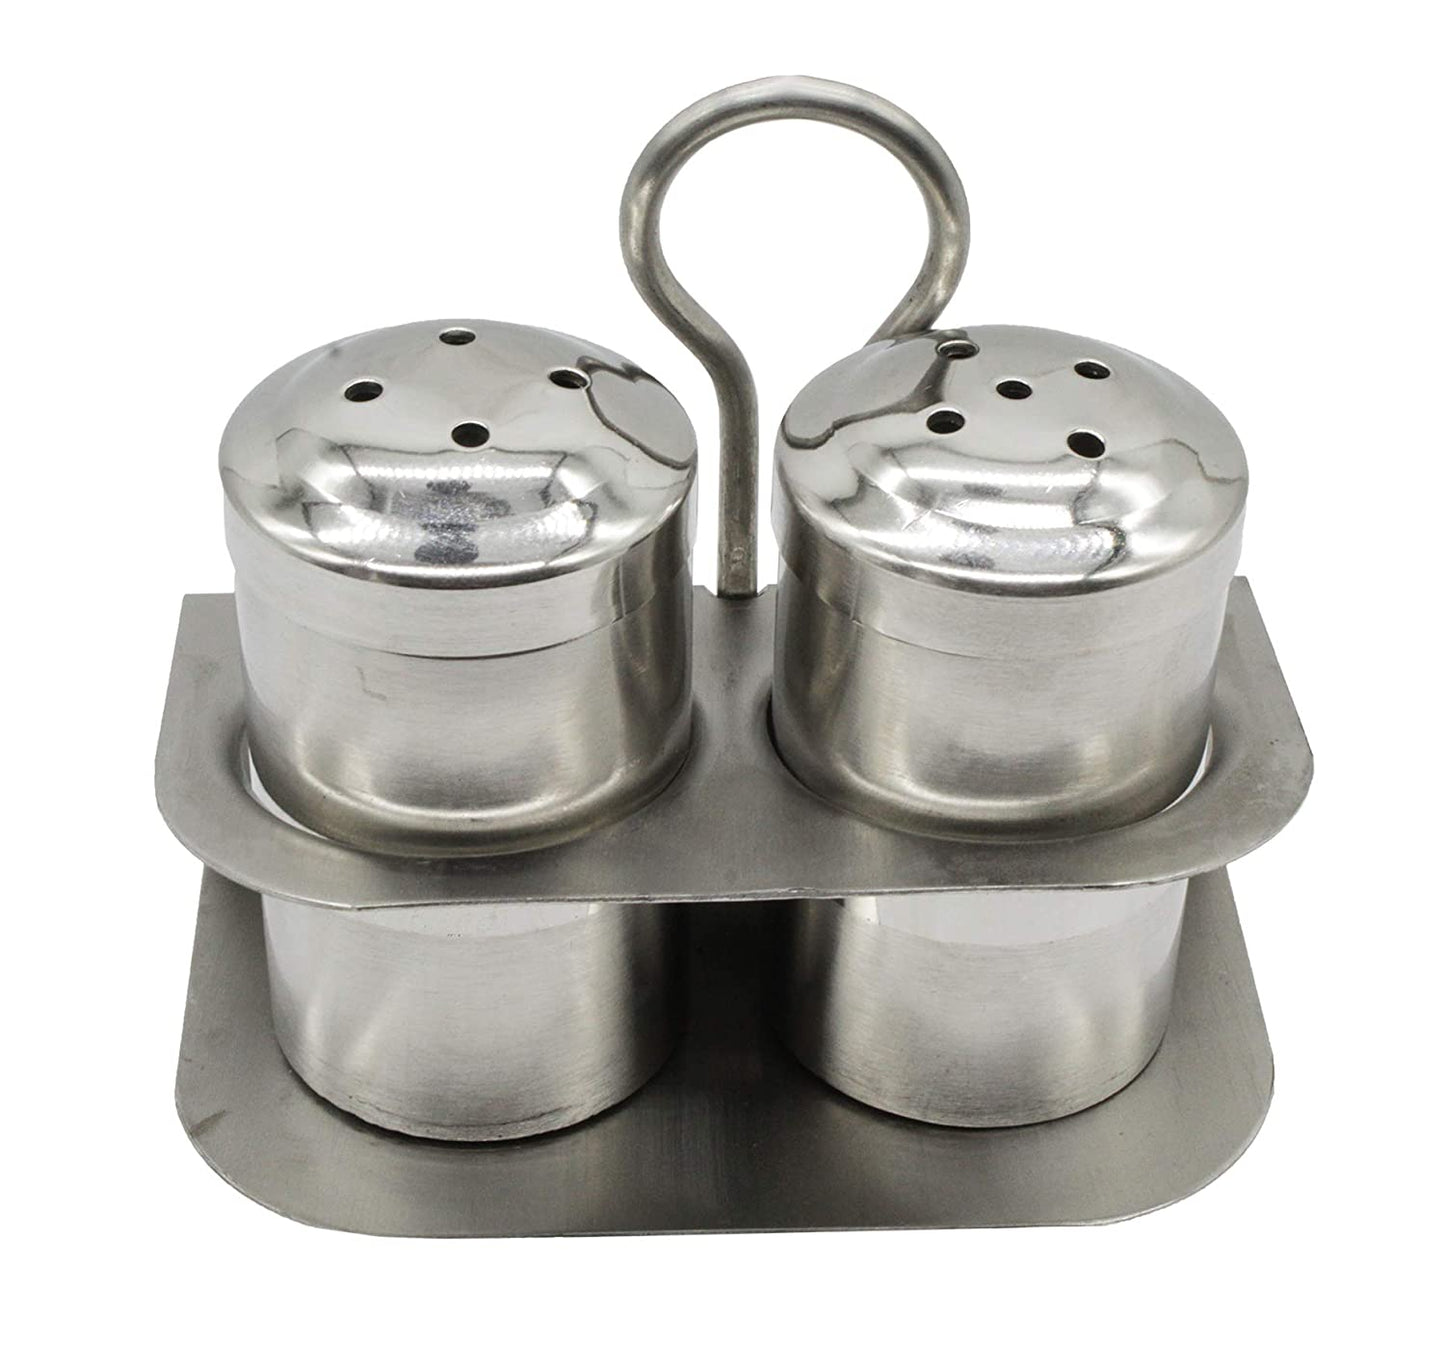 Stainless Steel Salt And Pepper Shaker Set With Stand